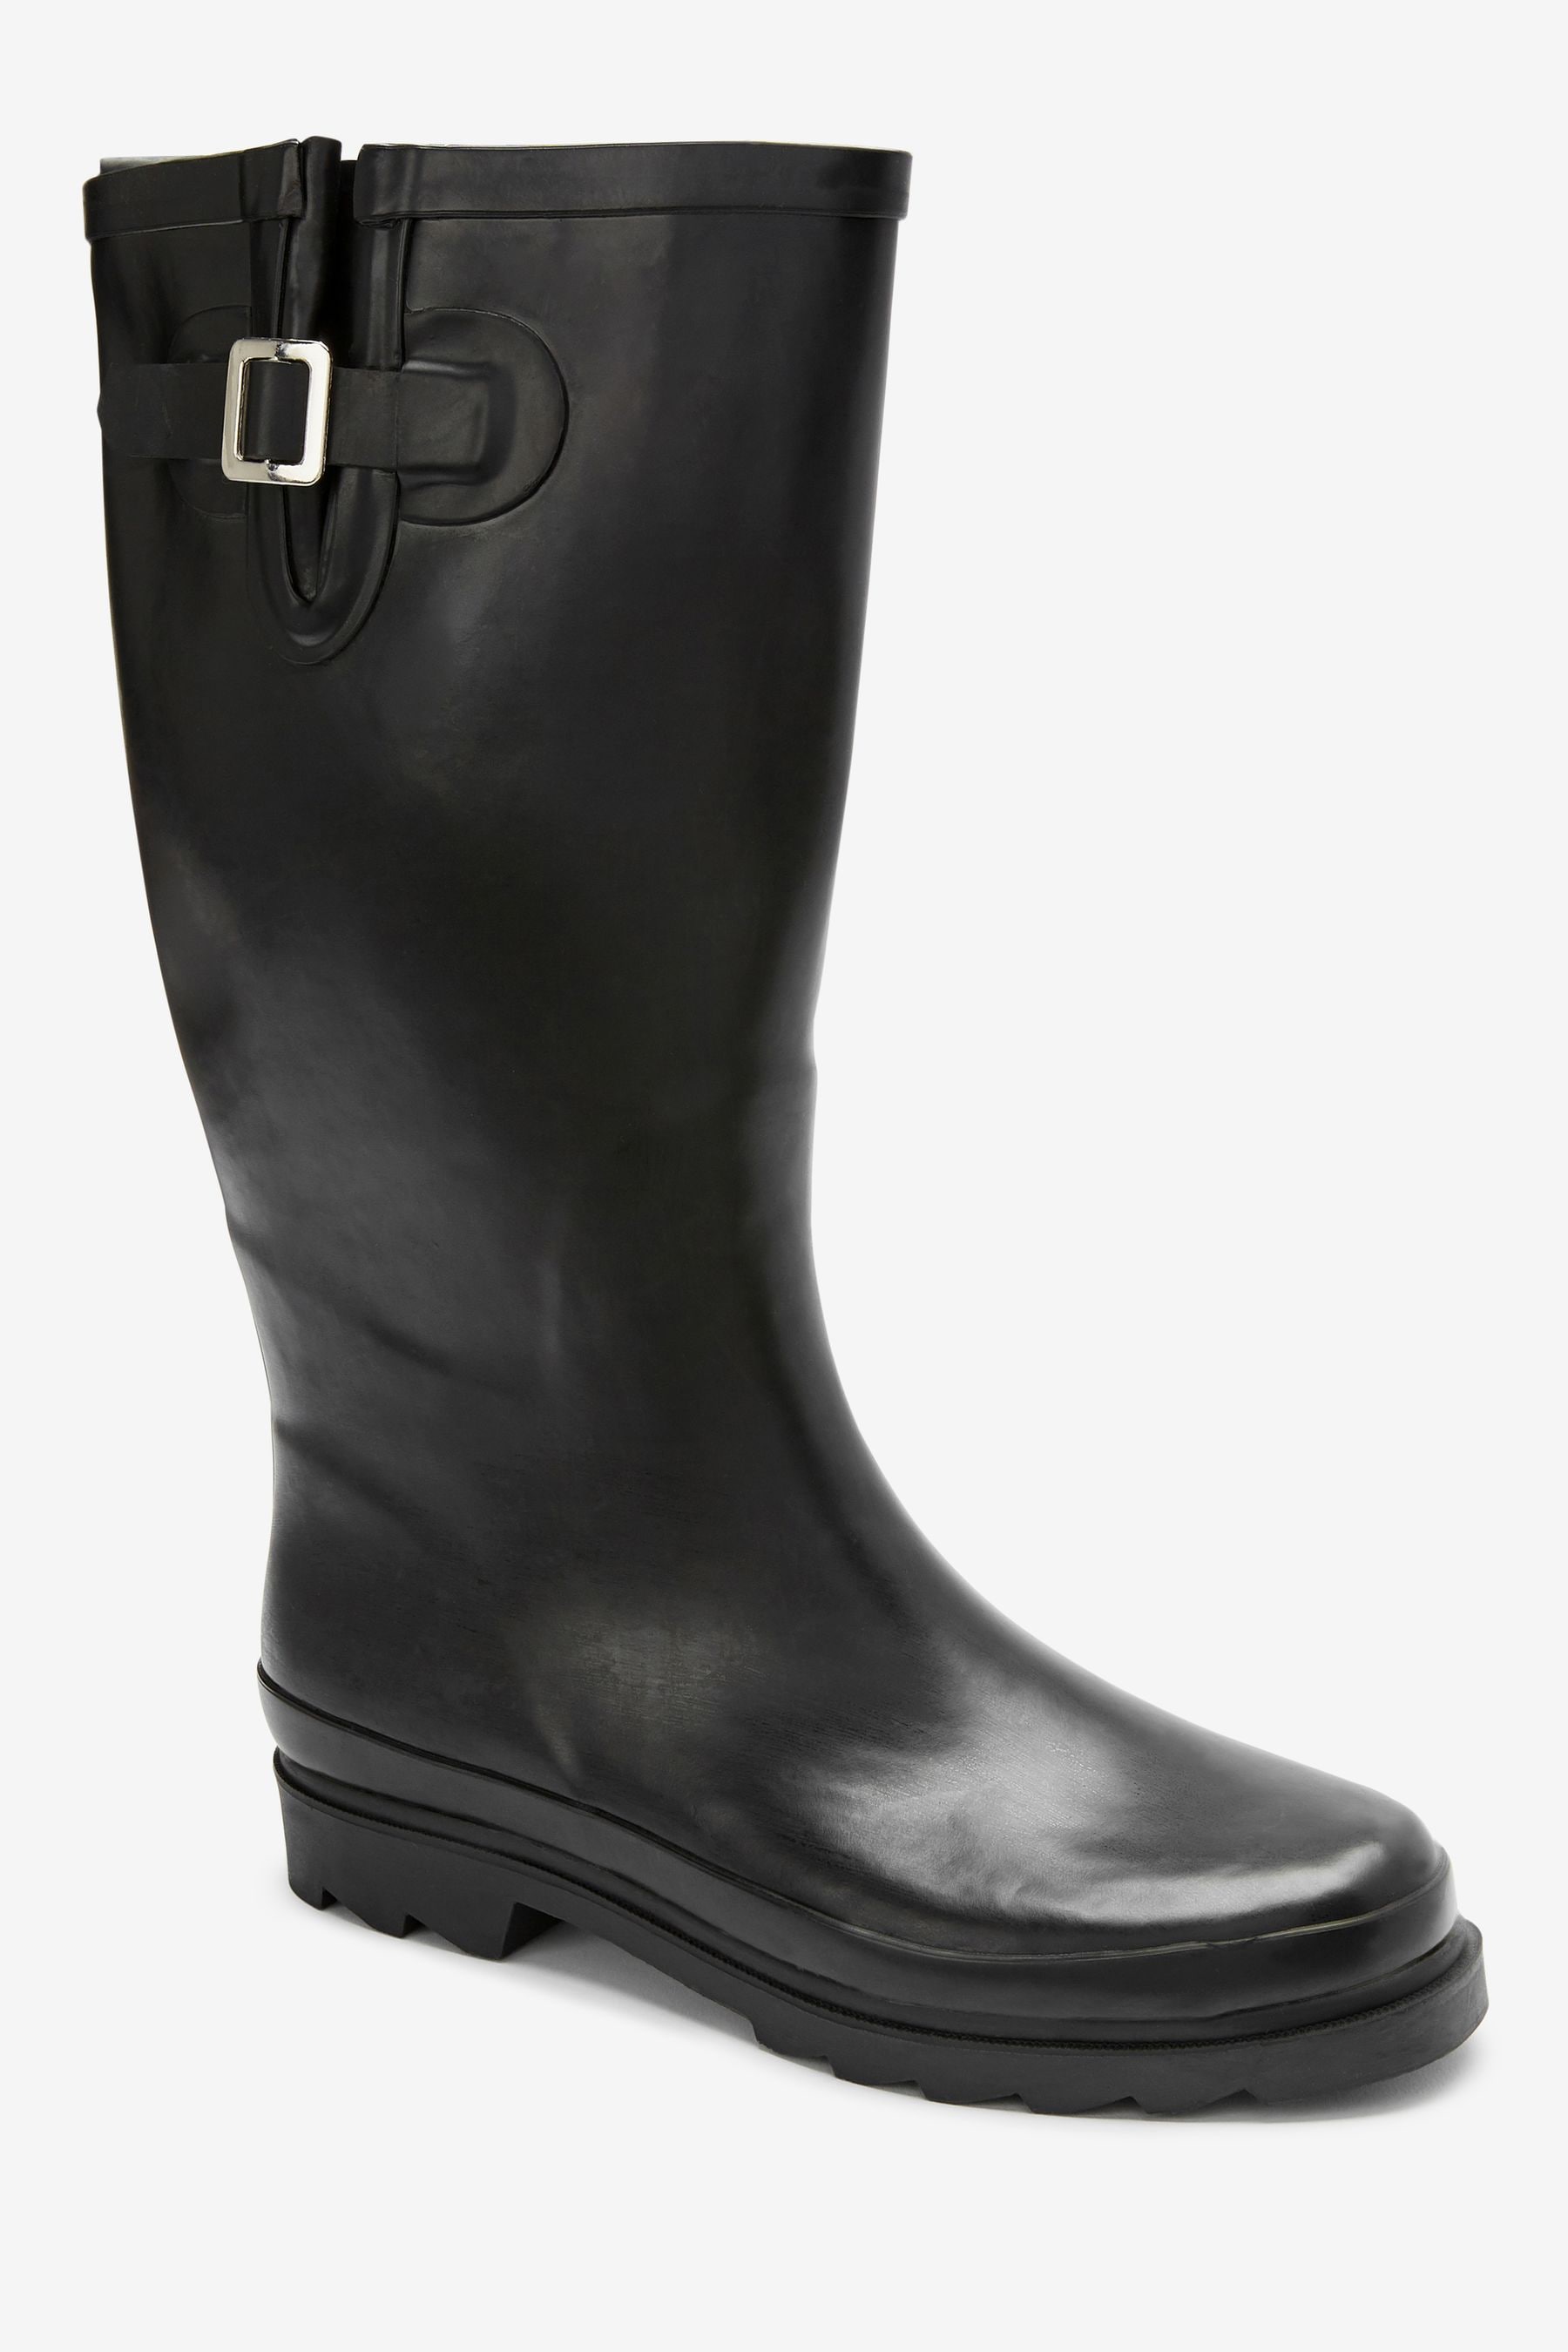 Buy Black Wellies from the Next UK online shop